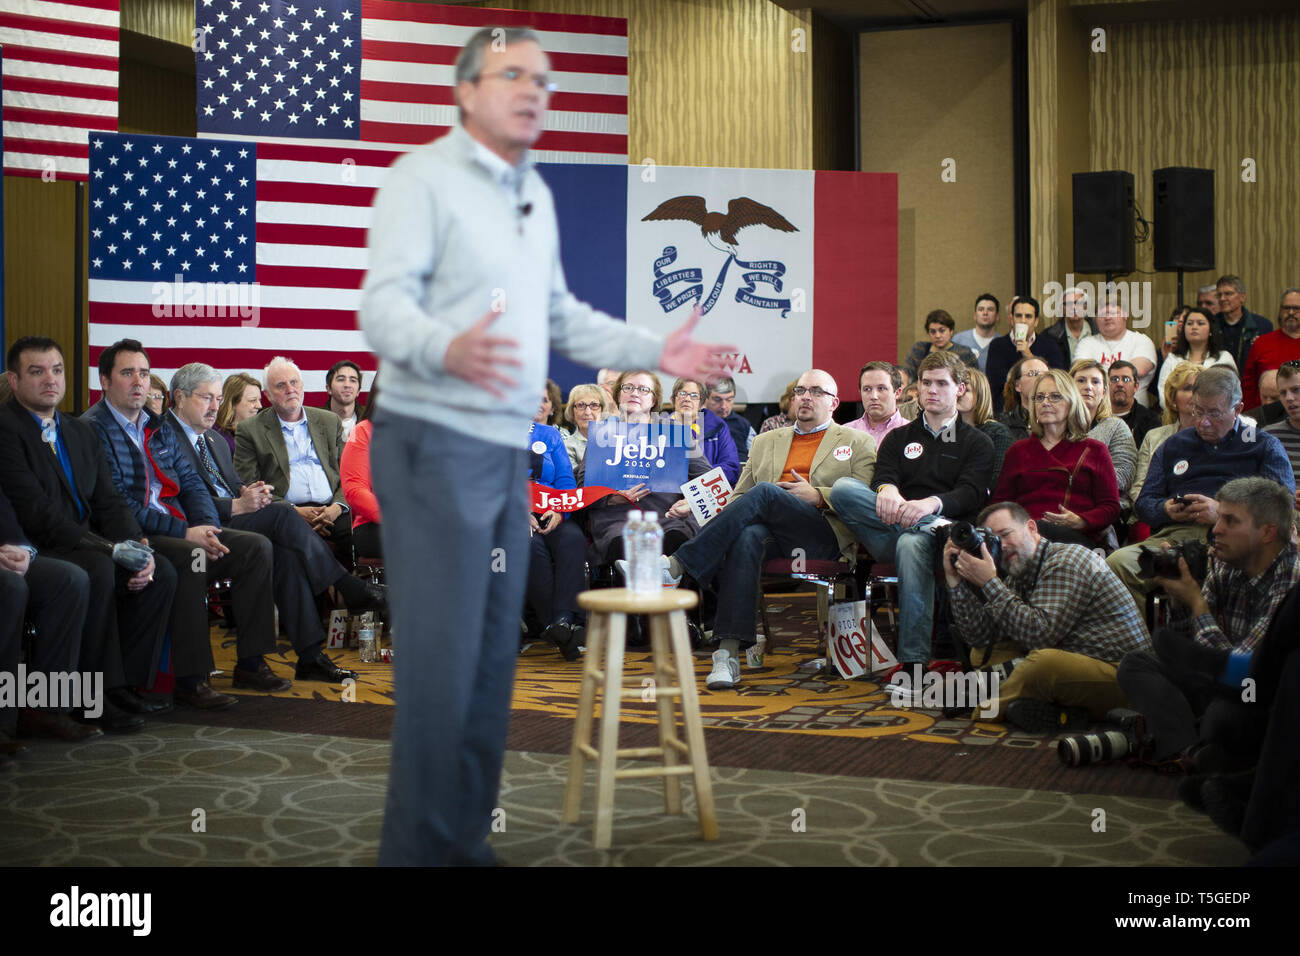 Des Moines, Iowa, USA. 1st Feb, 2016. People listen to Jeb Bush speak during a caucus event in Des Moines, Iowa, February 1, 2016.Bush, son of President George H.W. Bush and brother of President George W. Bush, lost to Sen. Ted Cruz from Texas. Credit: Bill Putnam/ZUMA Wire/Alamy Live News Stock Photo